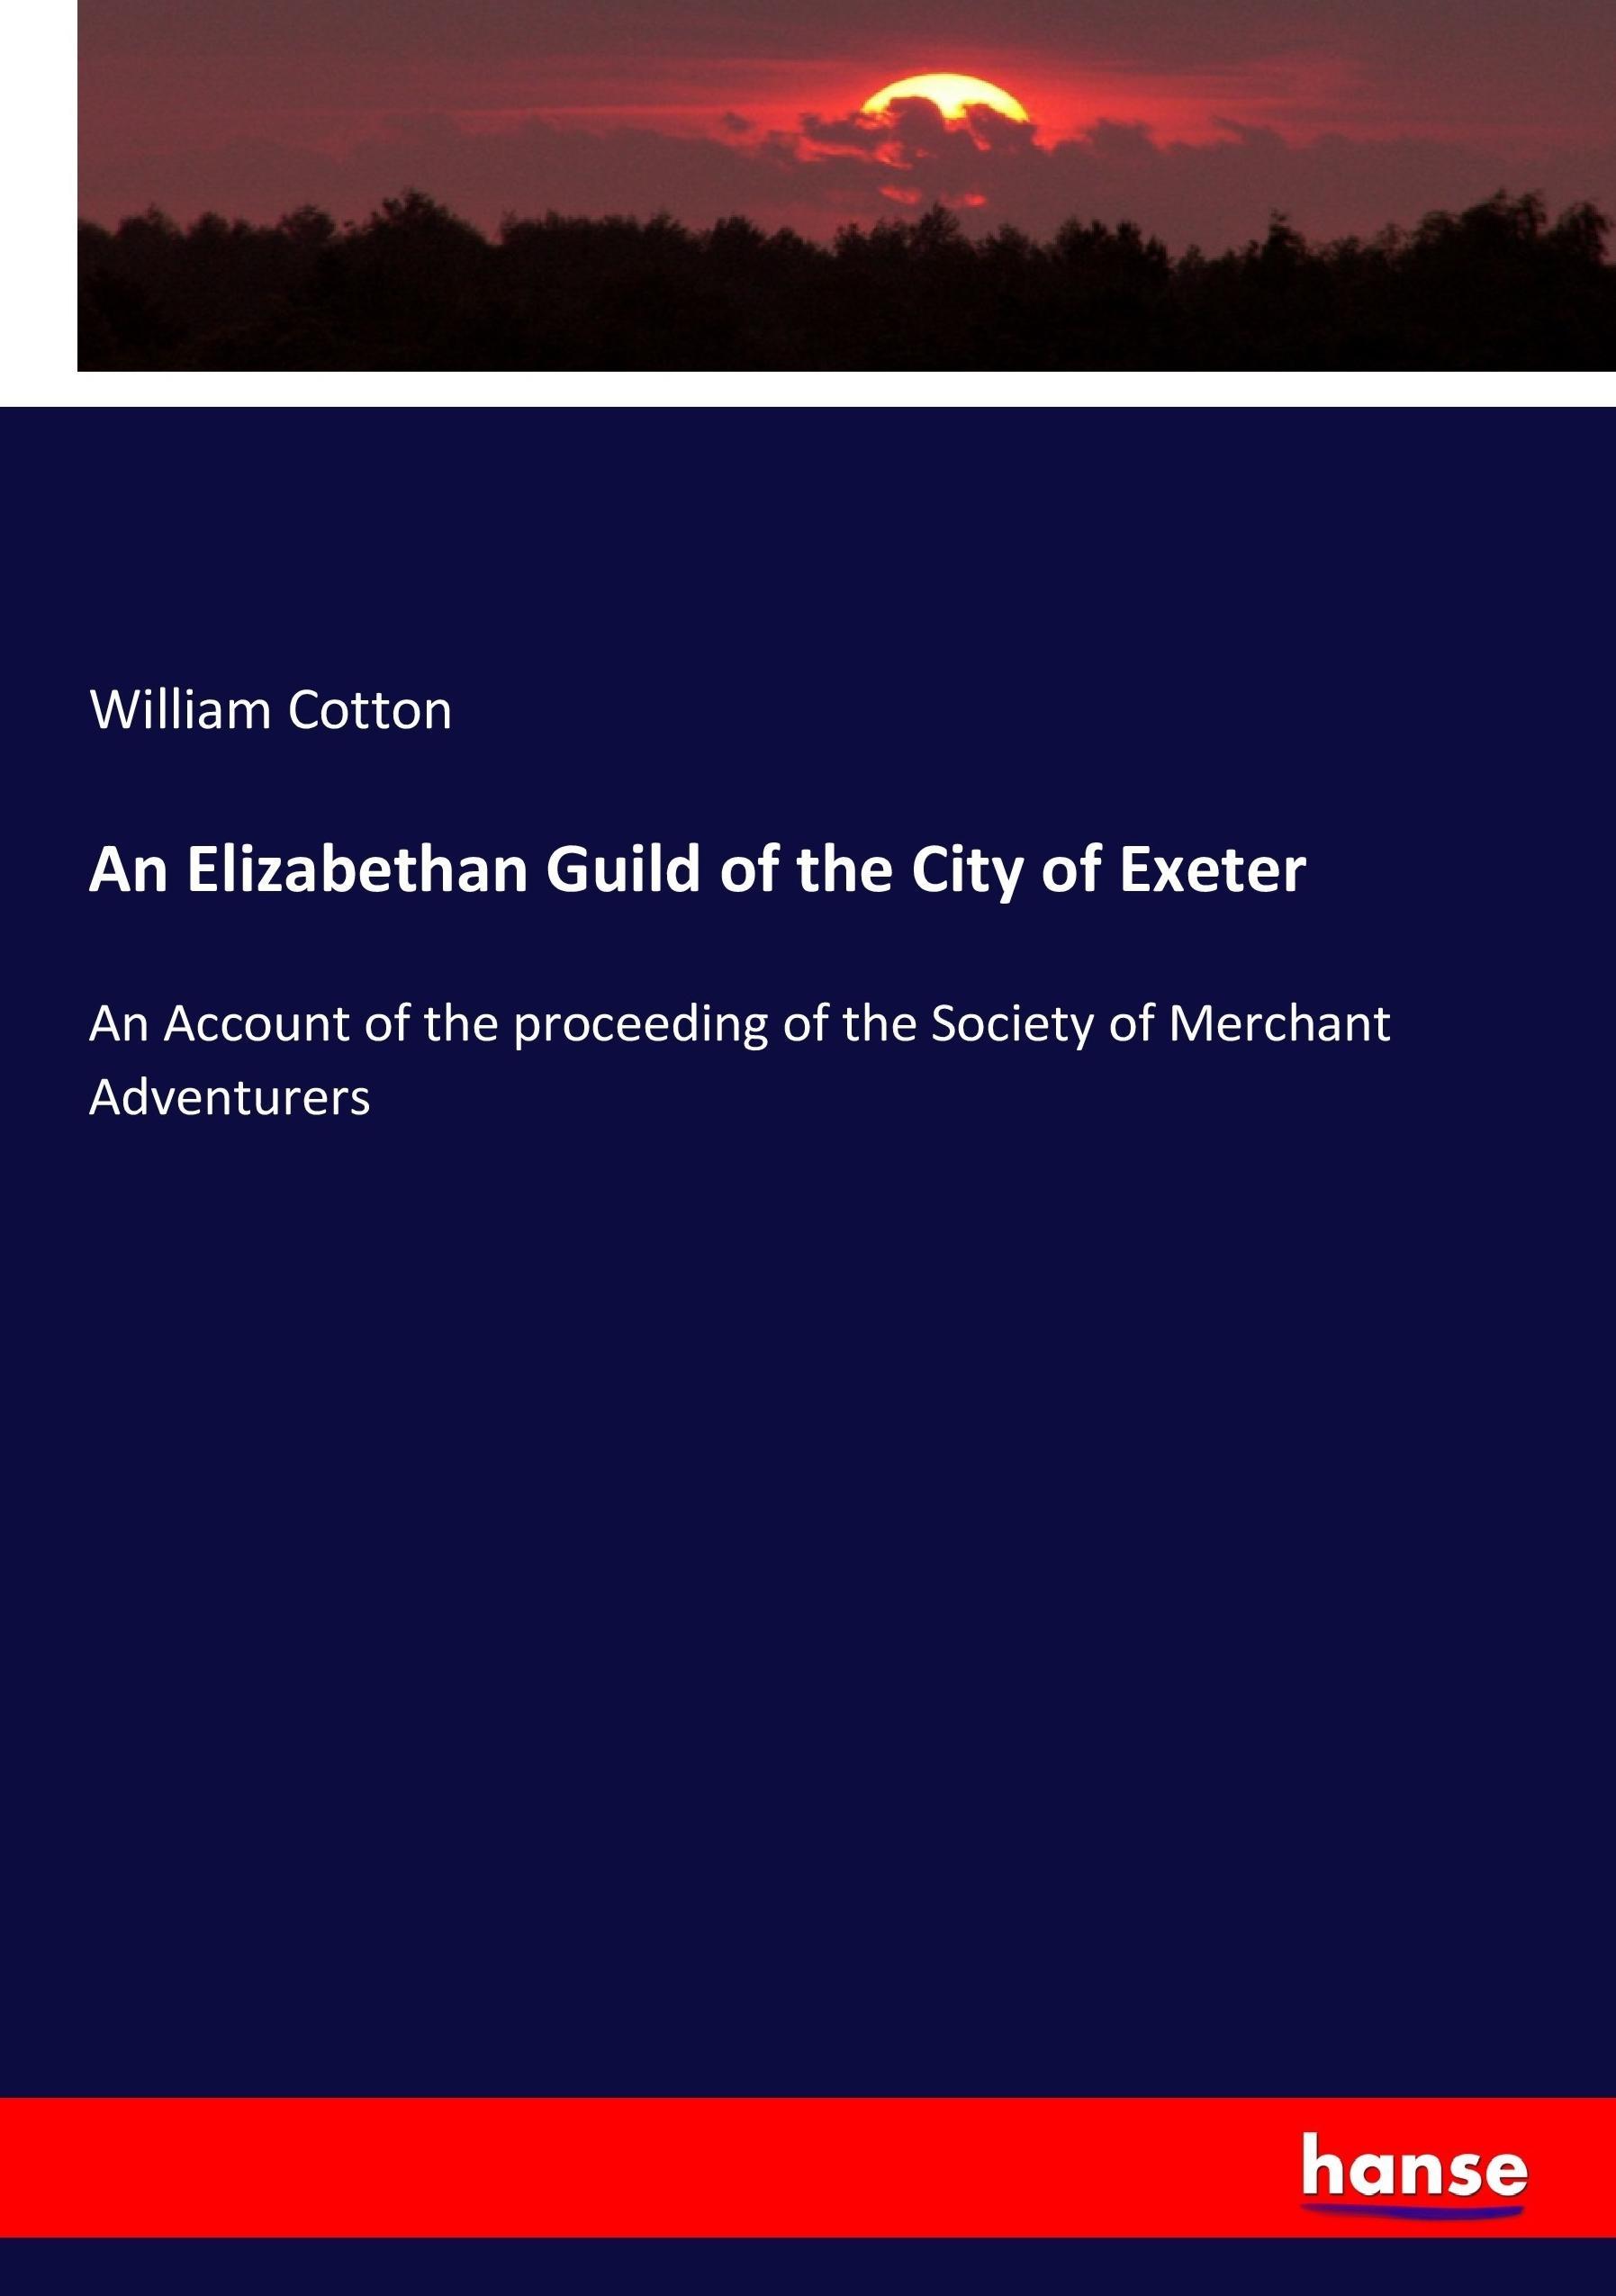 An Elizabethan Guild of the City of Exeter - Cotton, William